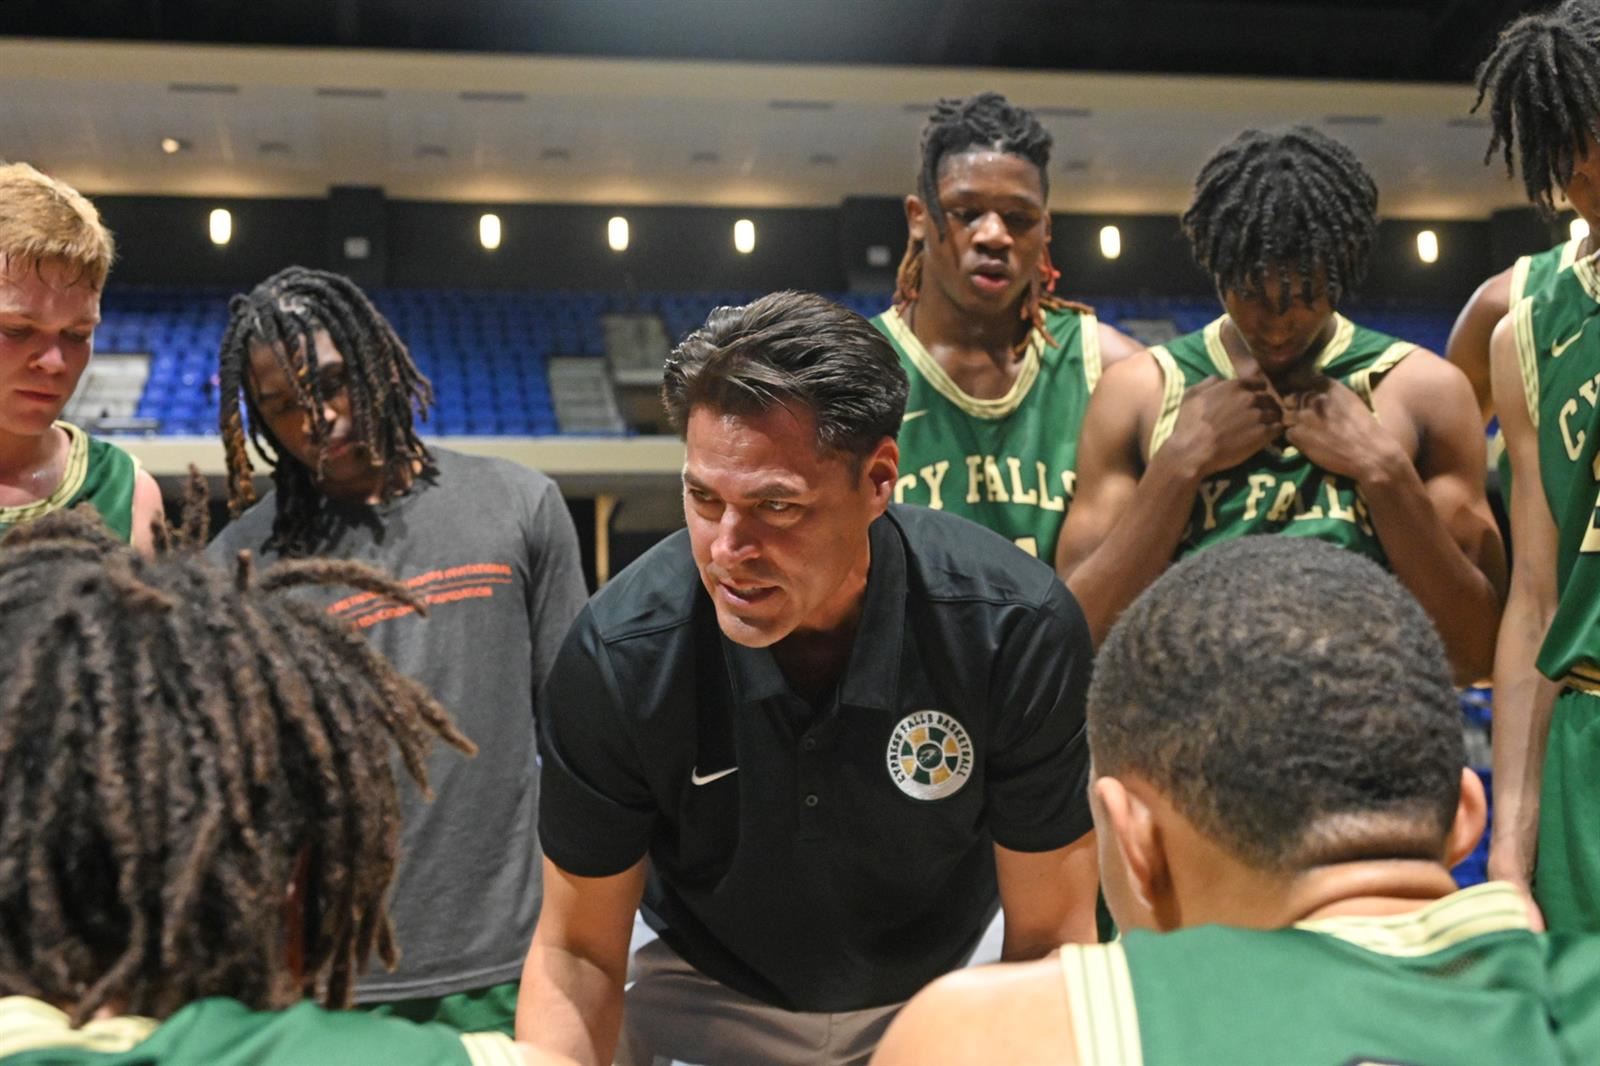 Cypress Falls High School Head Coach Richard Flores was voted the District 16-6A boys’ basketball Coach of the Year.